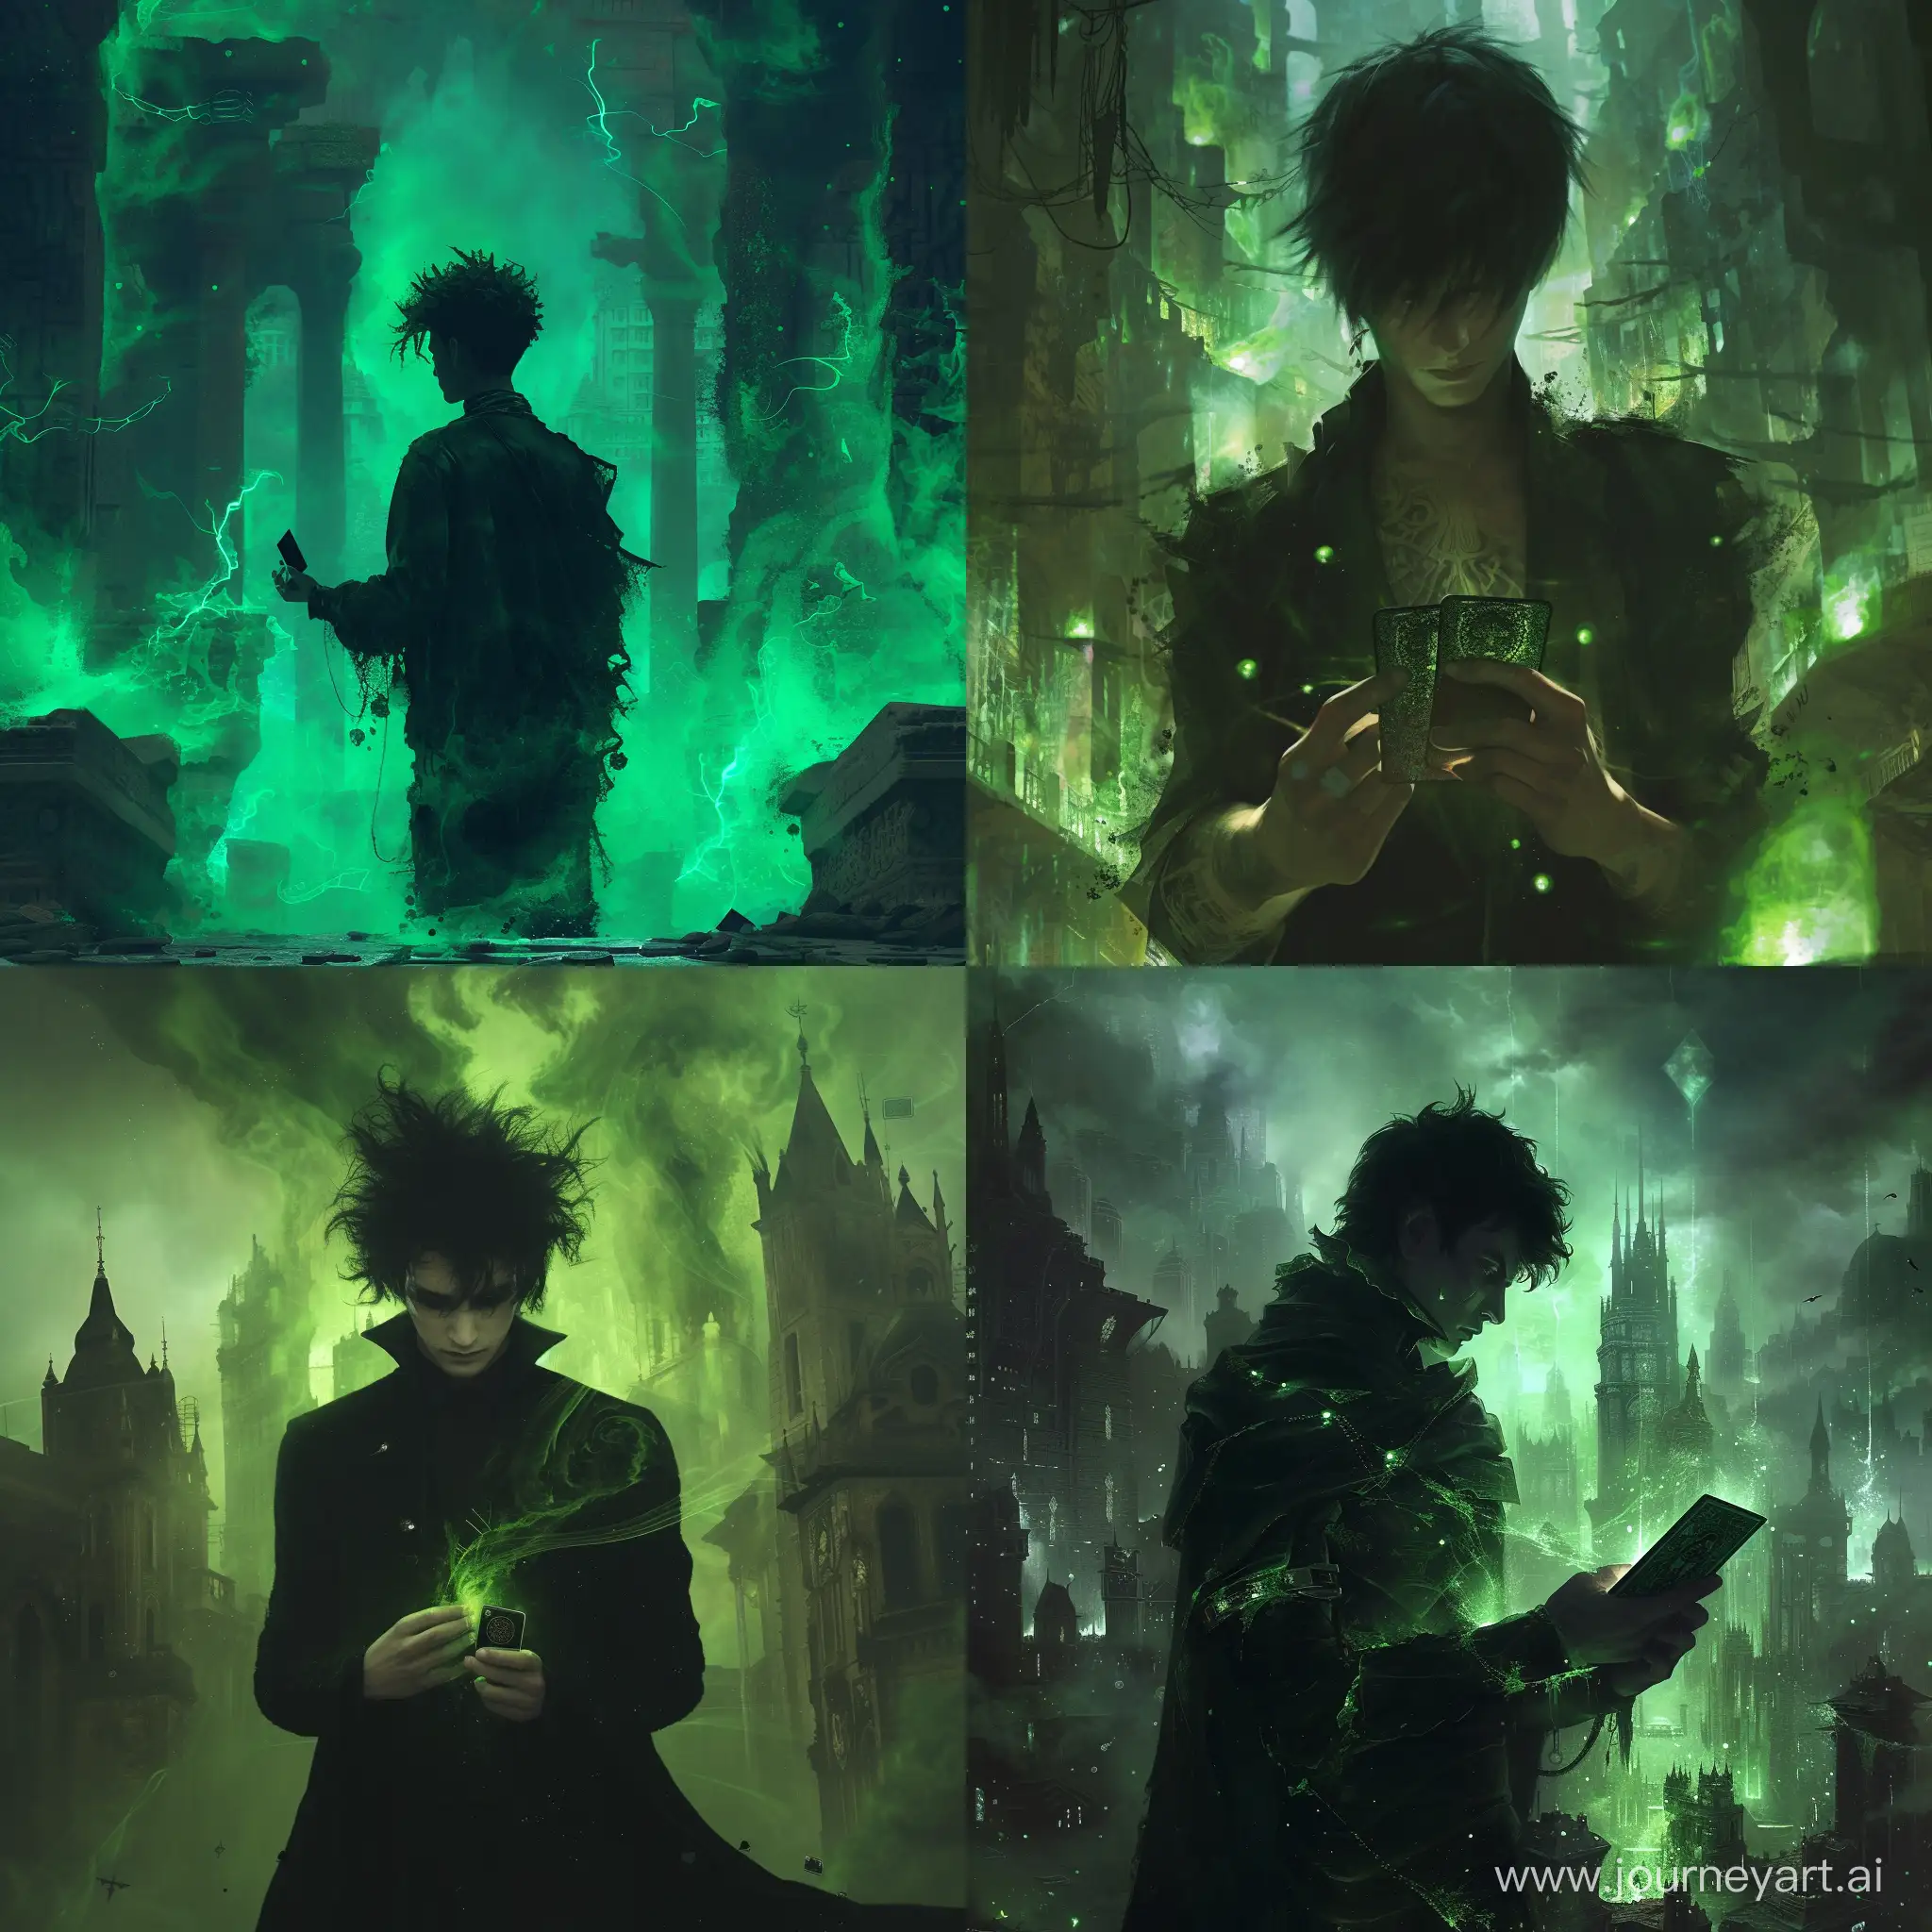 Mystical-Young-Man-in-Ancient-City-Embraced-by-Enigmatic-Green-Magic